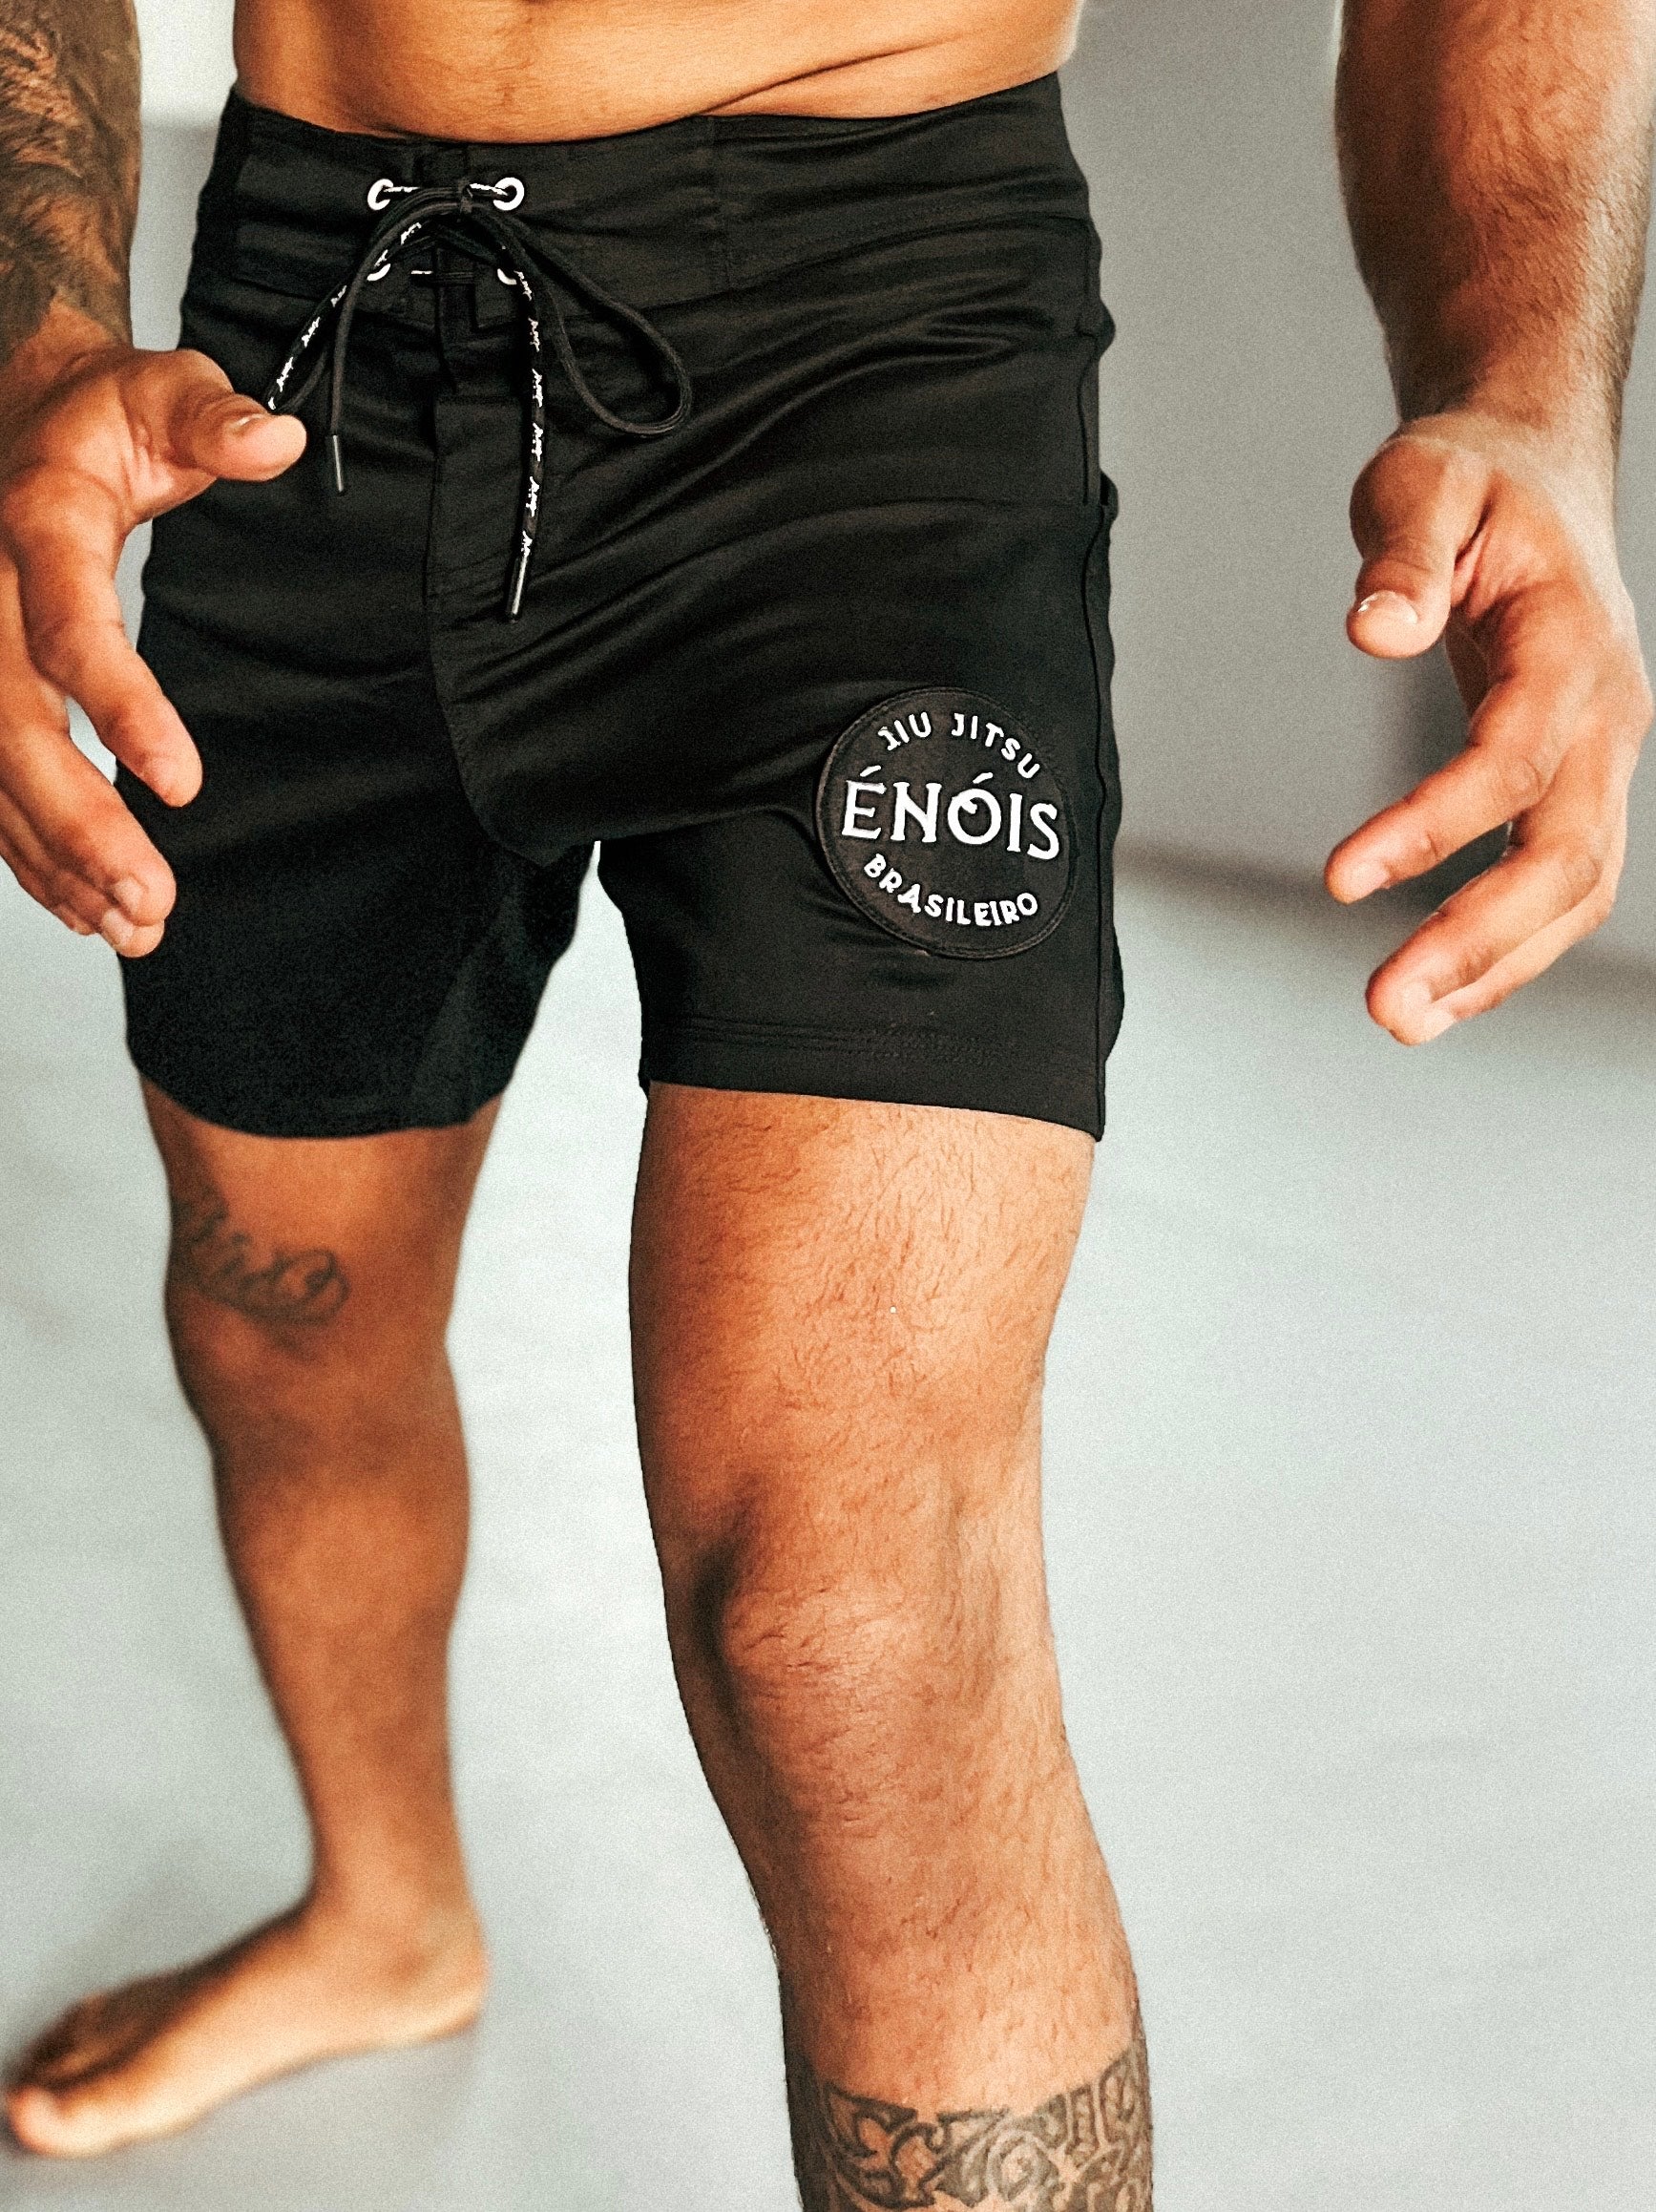 Mid-Thigh Cotton/Spandex Stretch Grappling Shorts